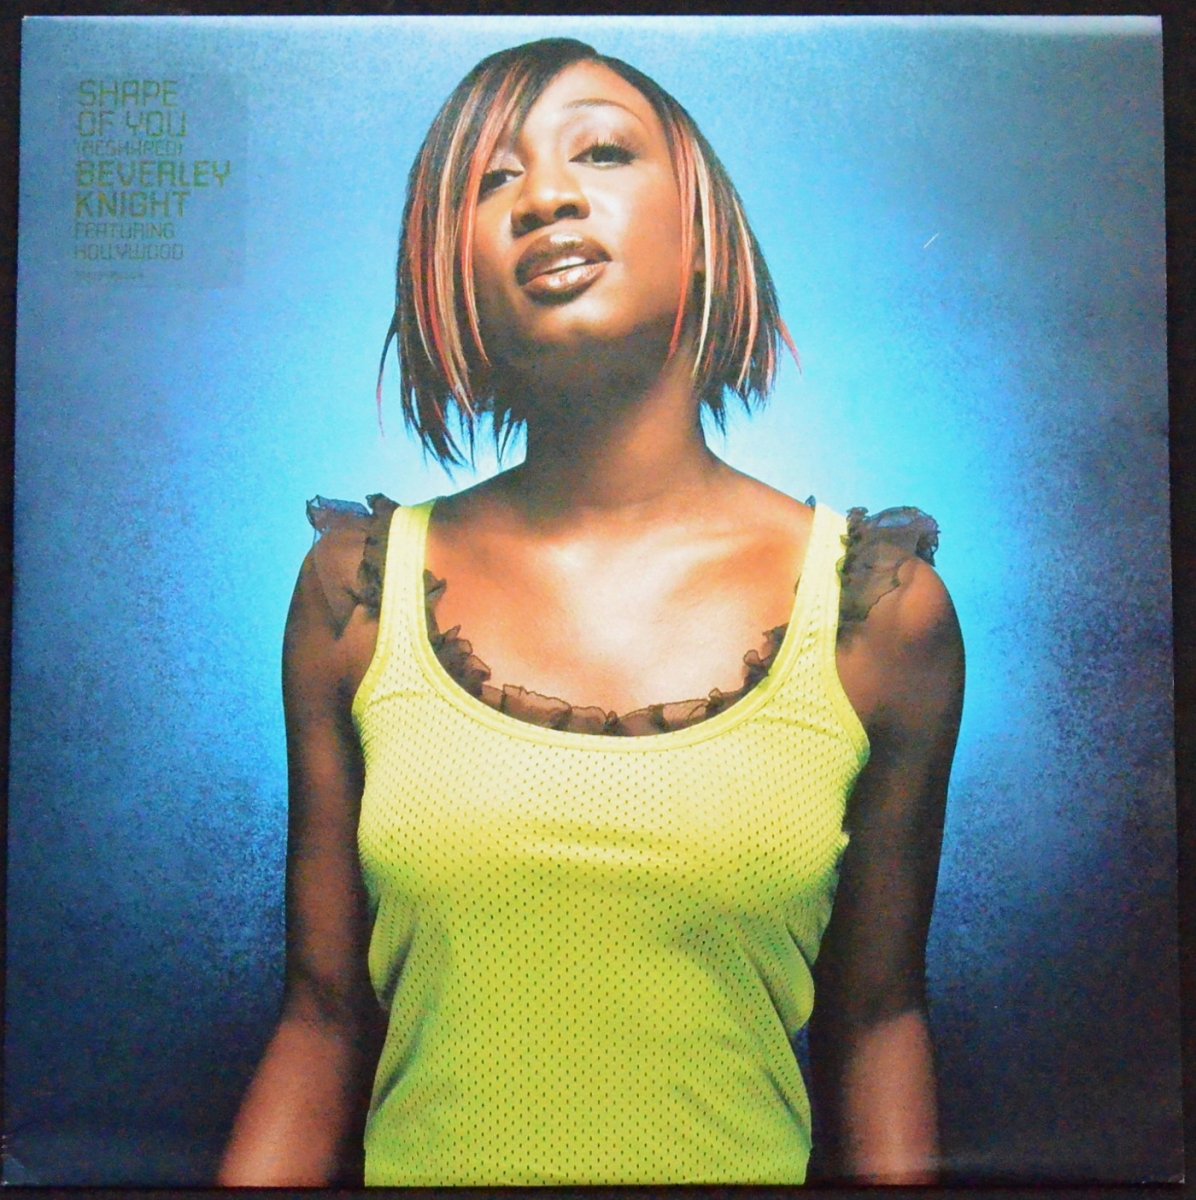 BEVERLEY KNIGHT ‎/ SHAPE OF YOU (RESHAPED) (12